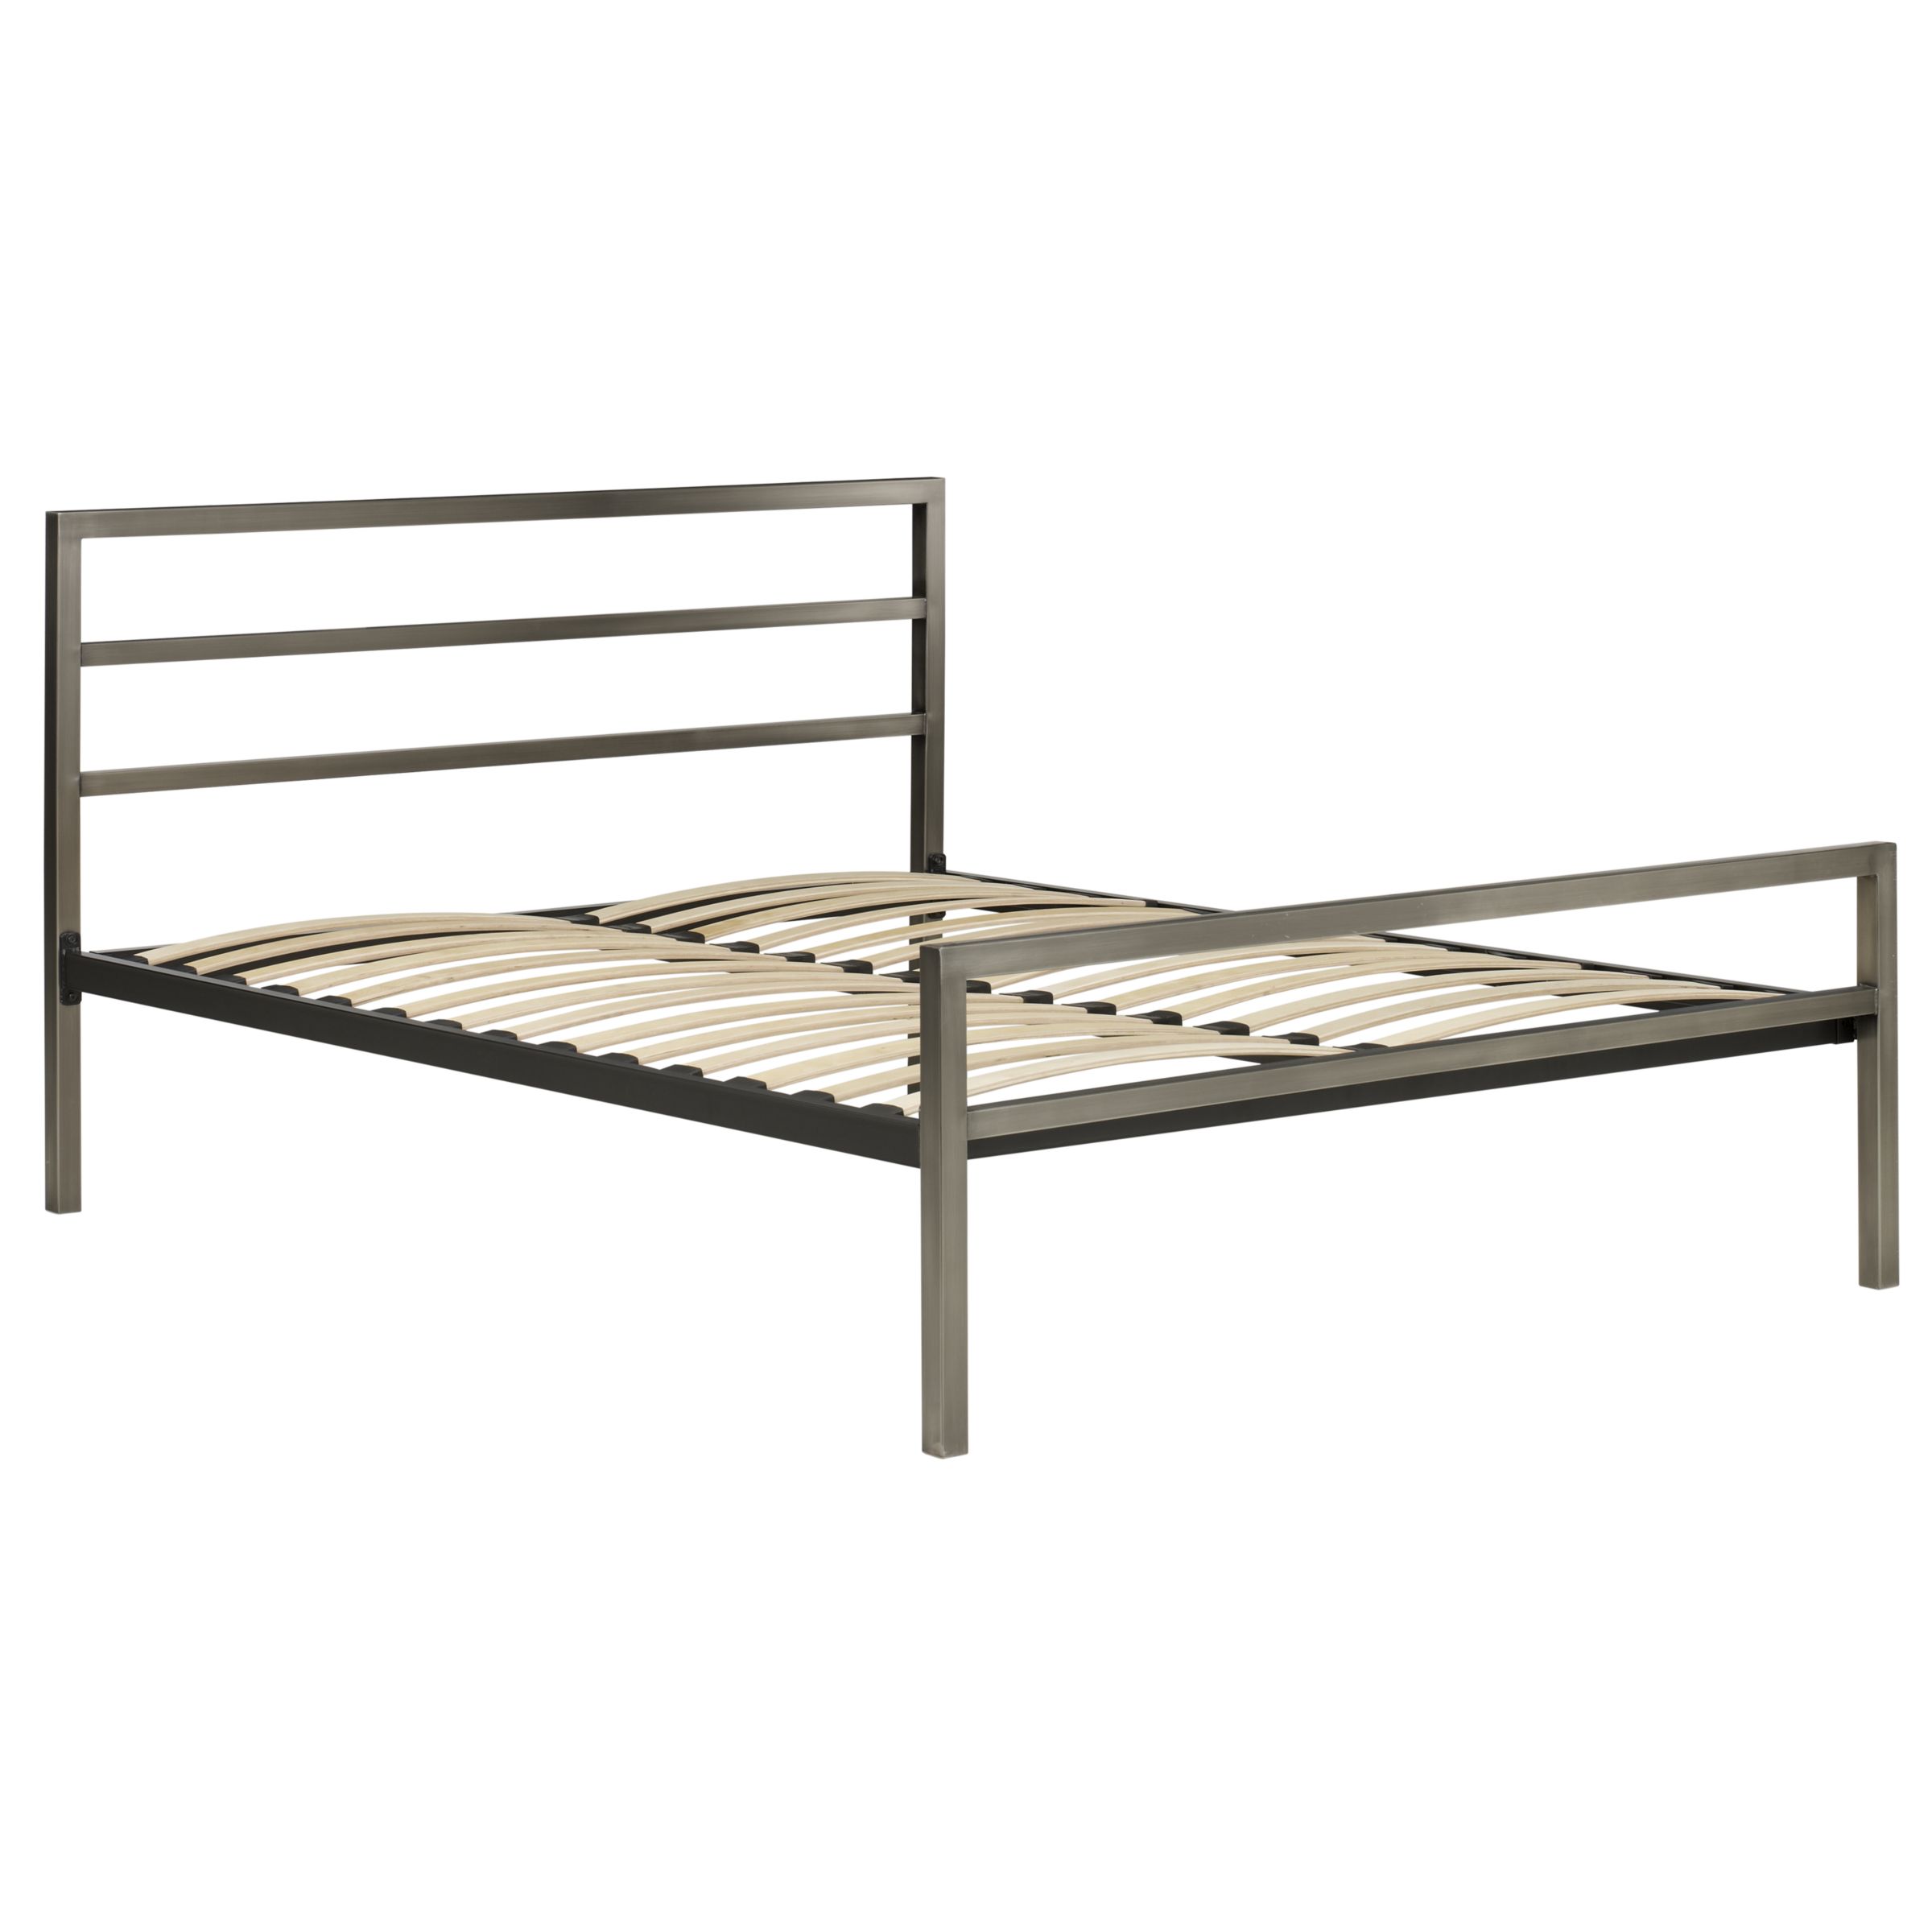 Sherford Bedstead, Double